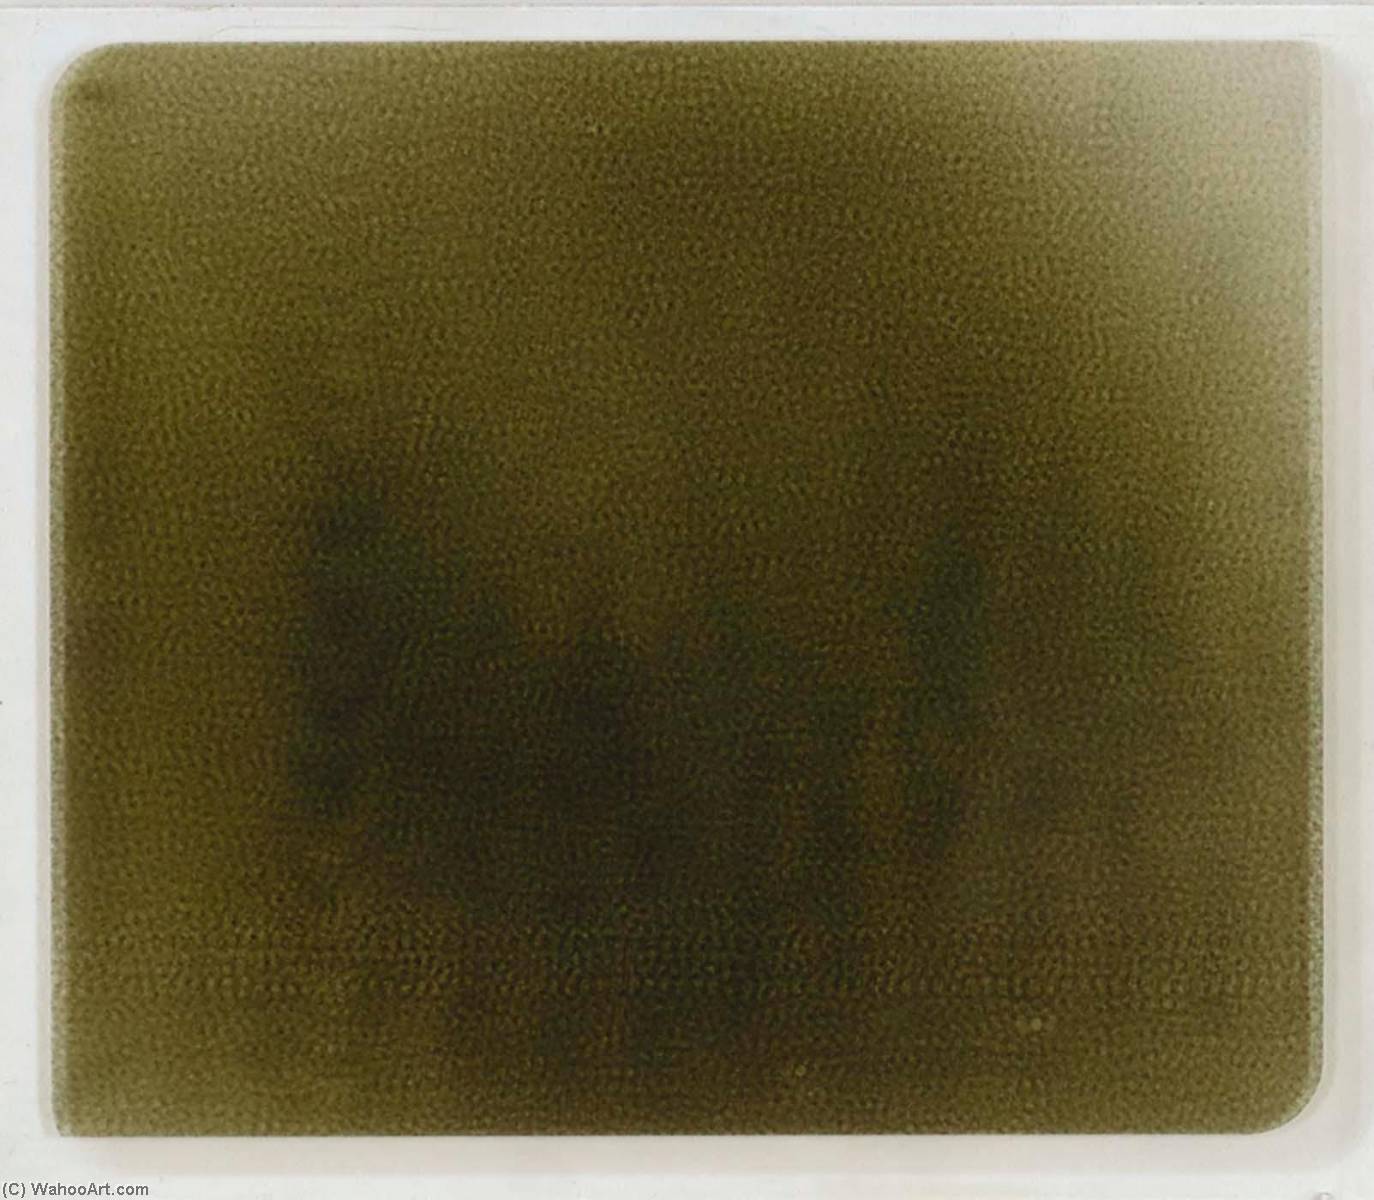 WikiOO.org - 백과 사전 - 회화, 삽화 Ed Mcgowin - 7 1 78 (from the Name Change Project)